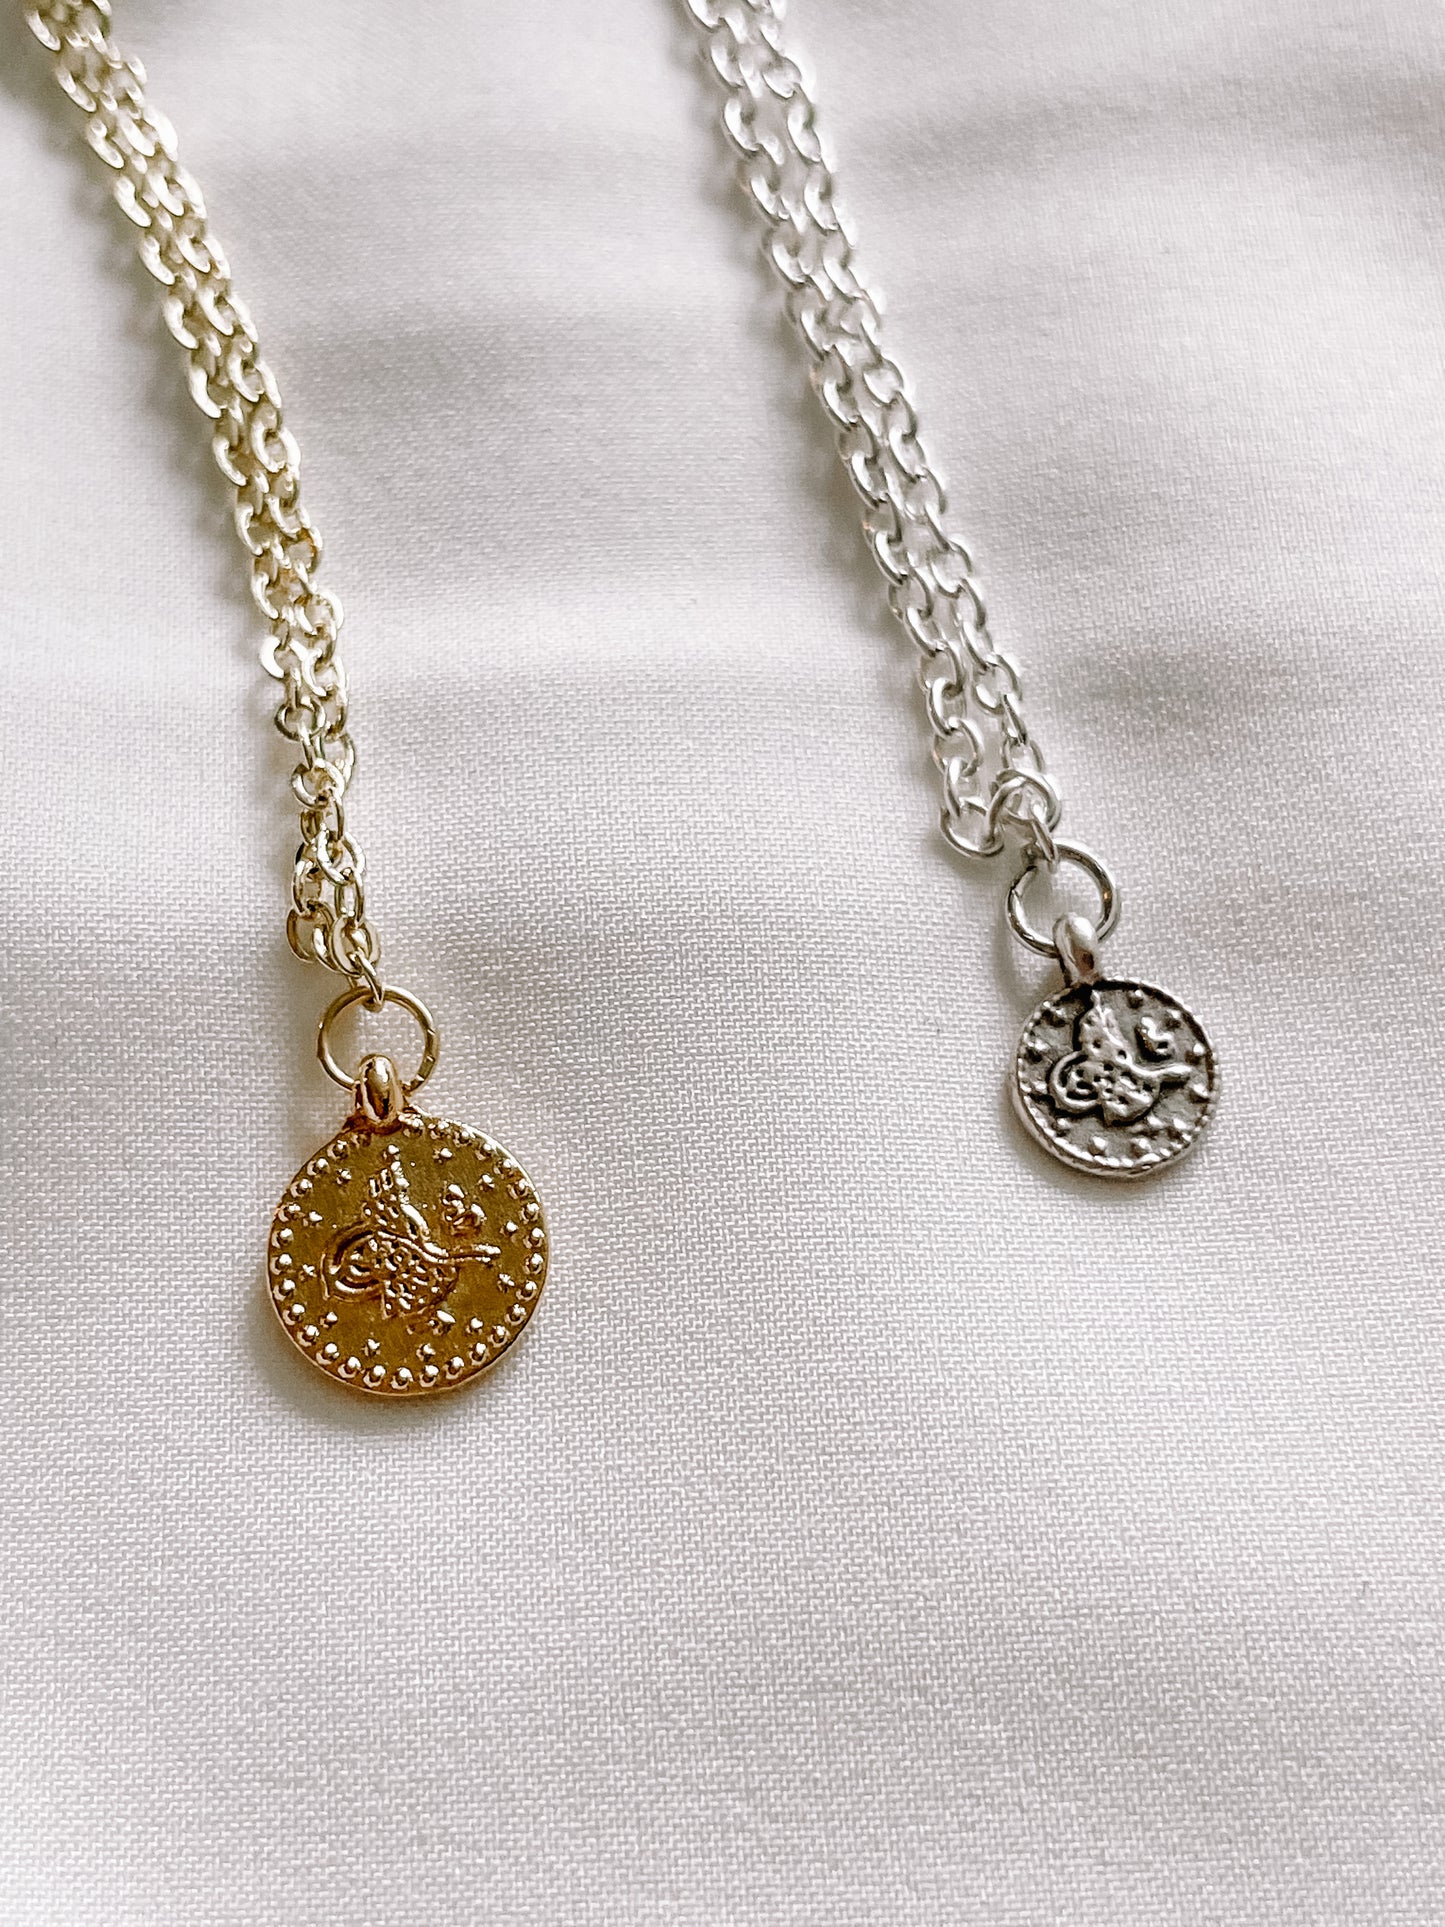 Coin charm necklace